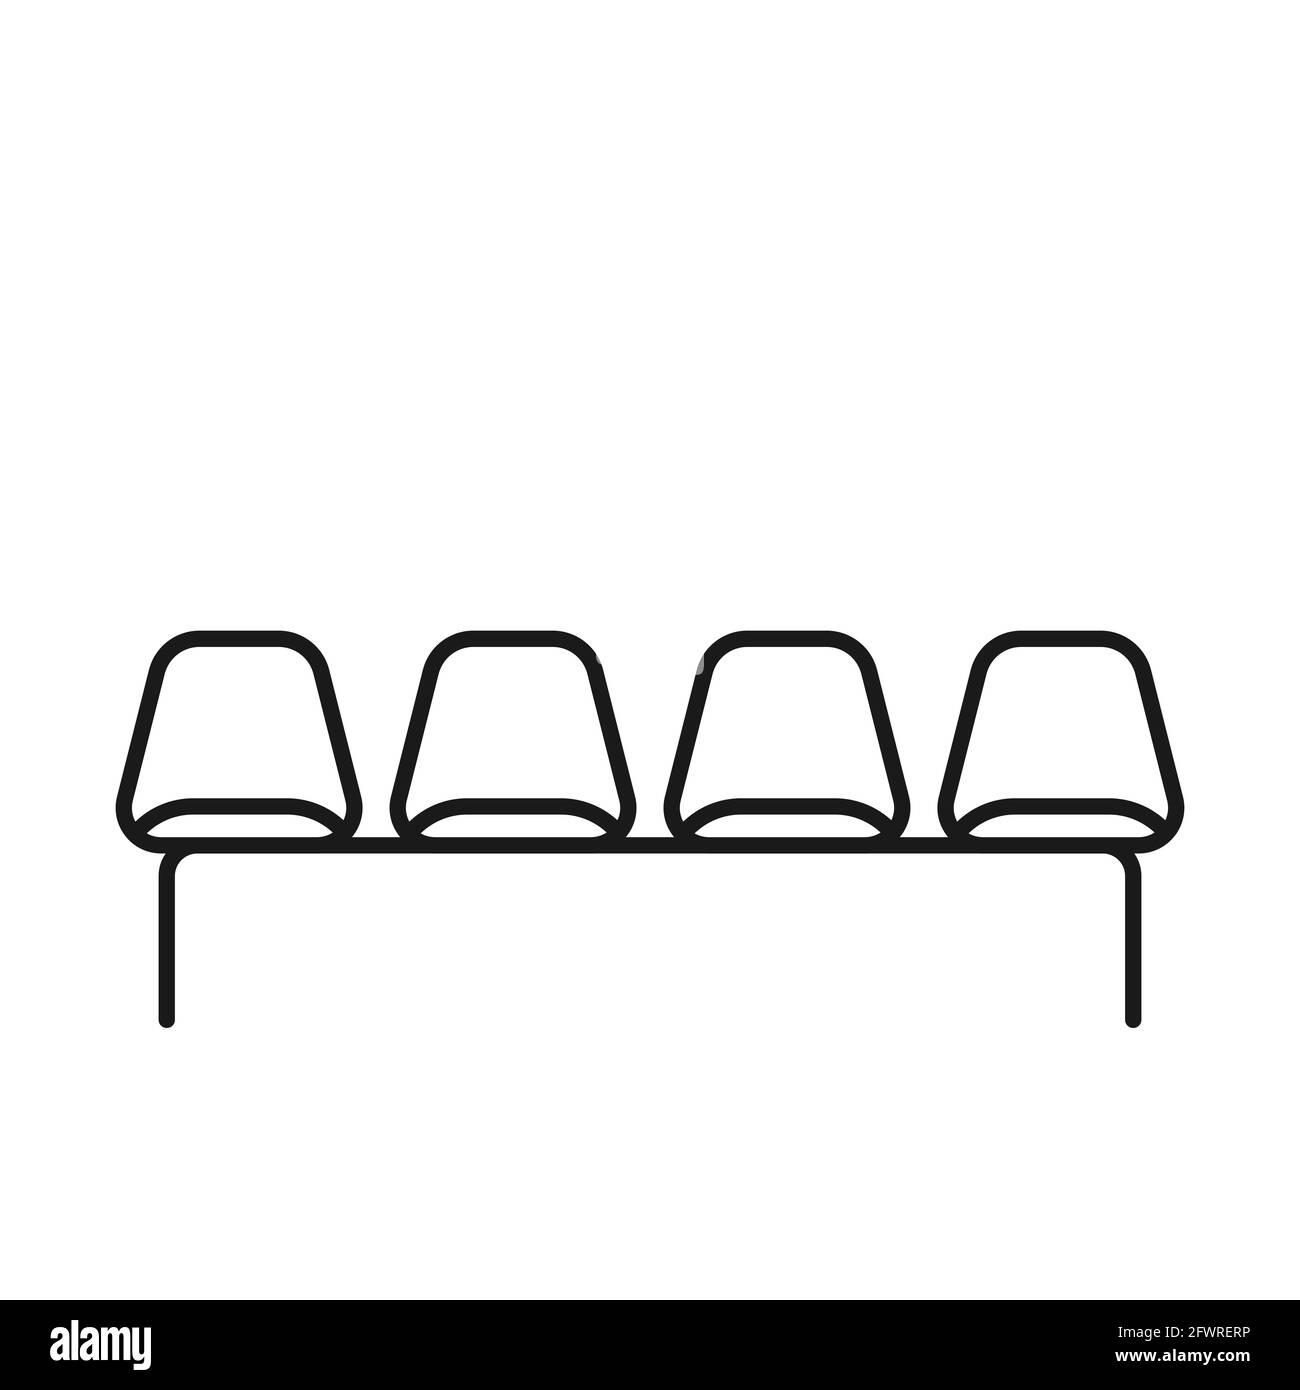 Waiting room icon. Black thick outline. Four empty chairs. Vector illustration, flat design Stock Vector